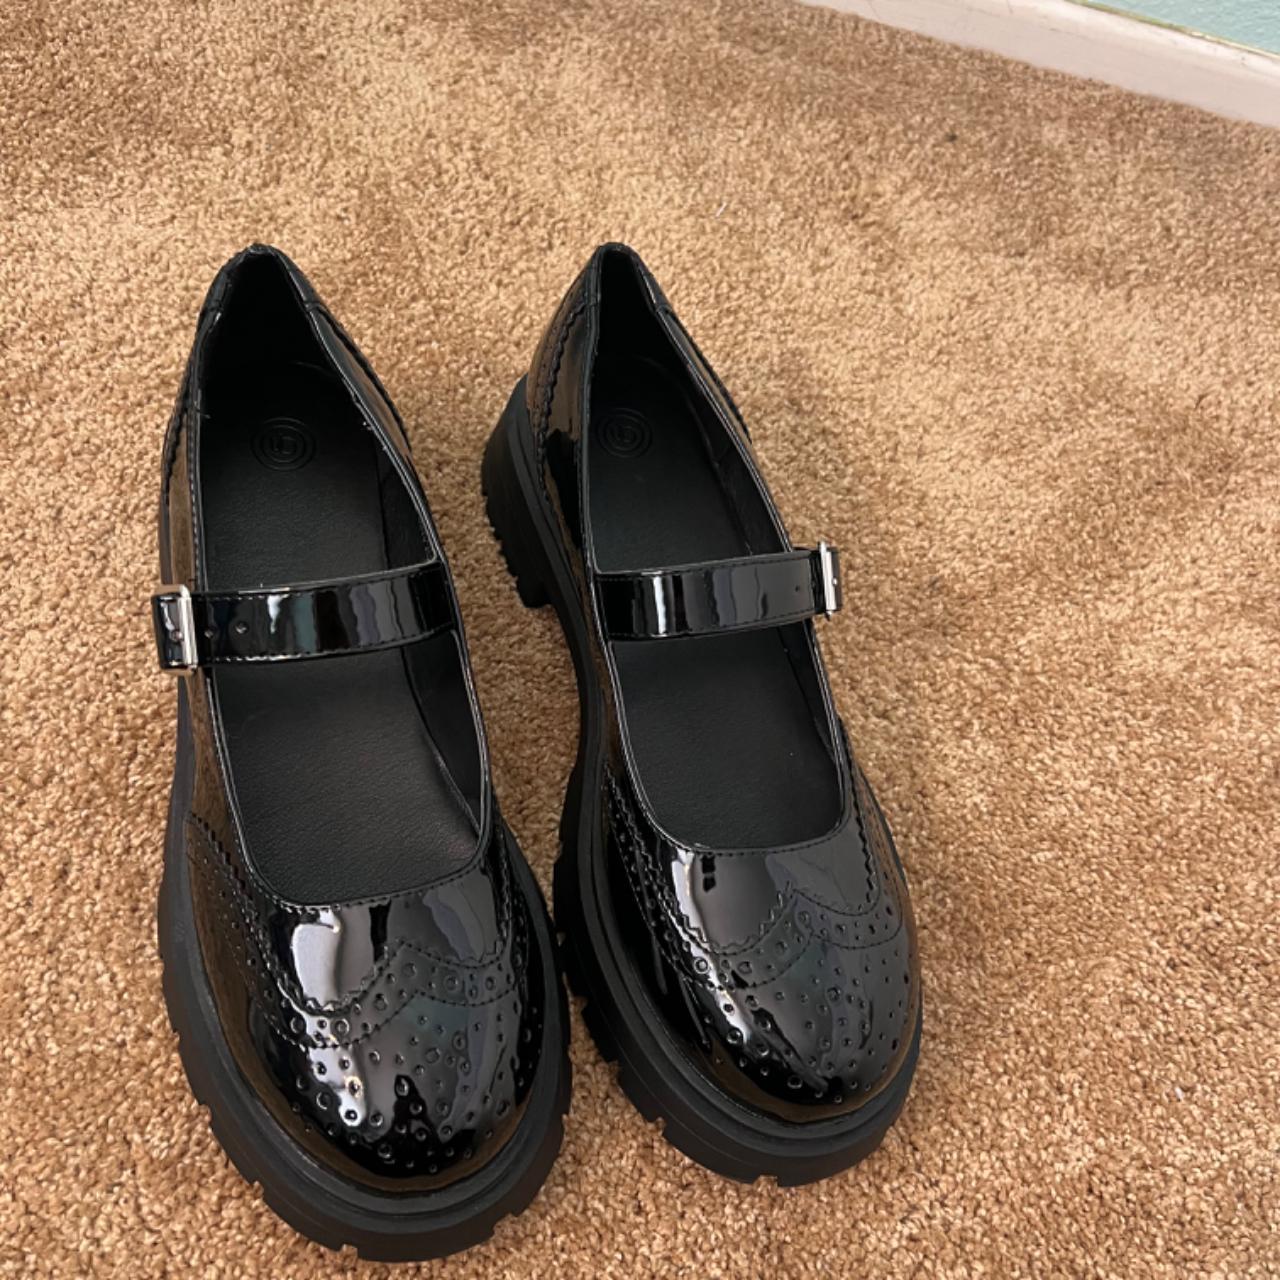 Urban Outfitters Women's Black Loafers (2)